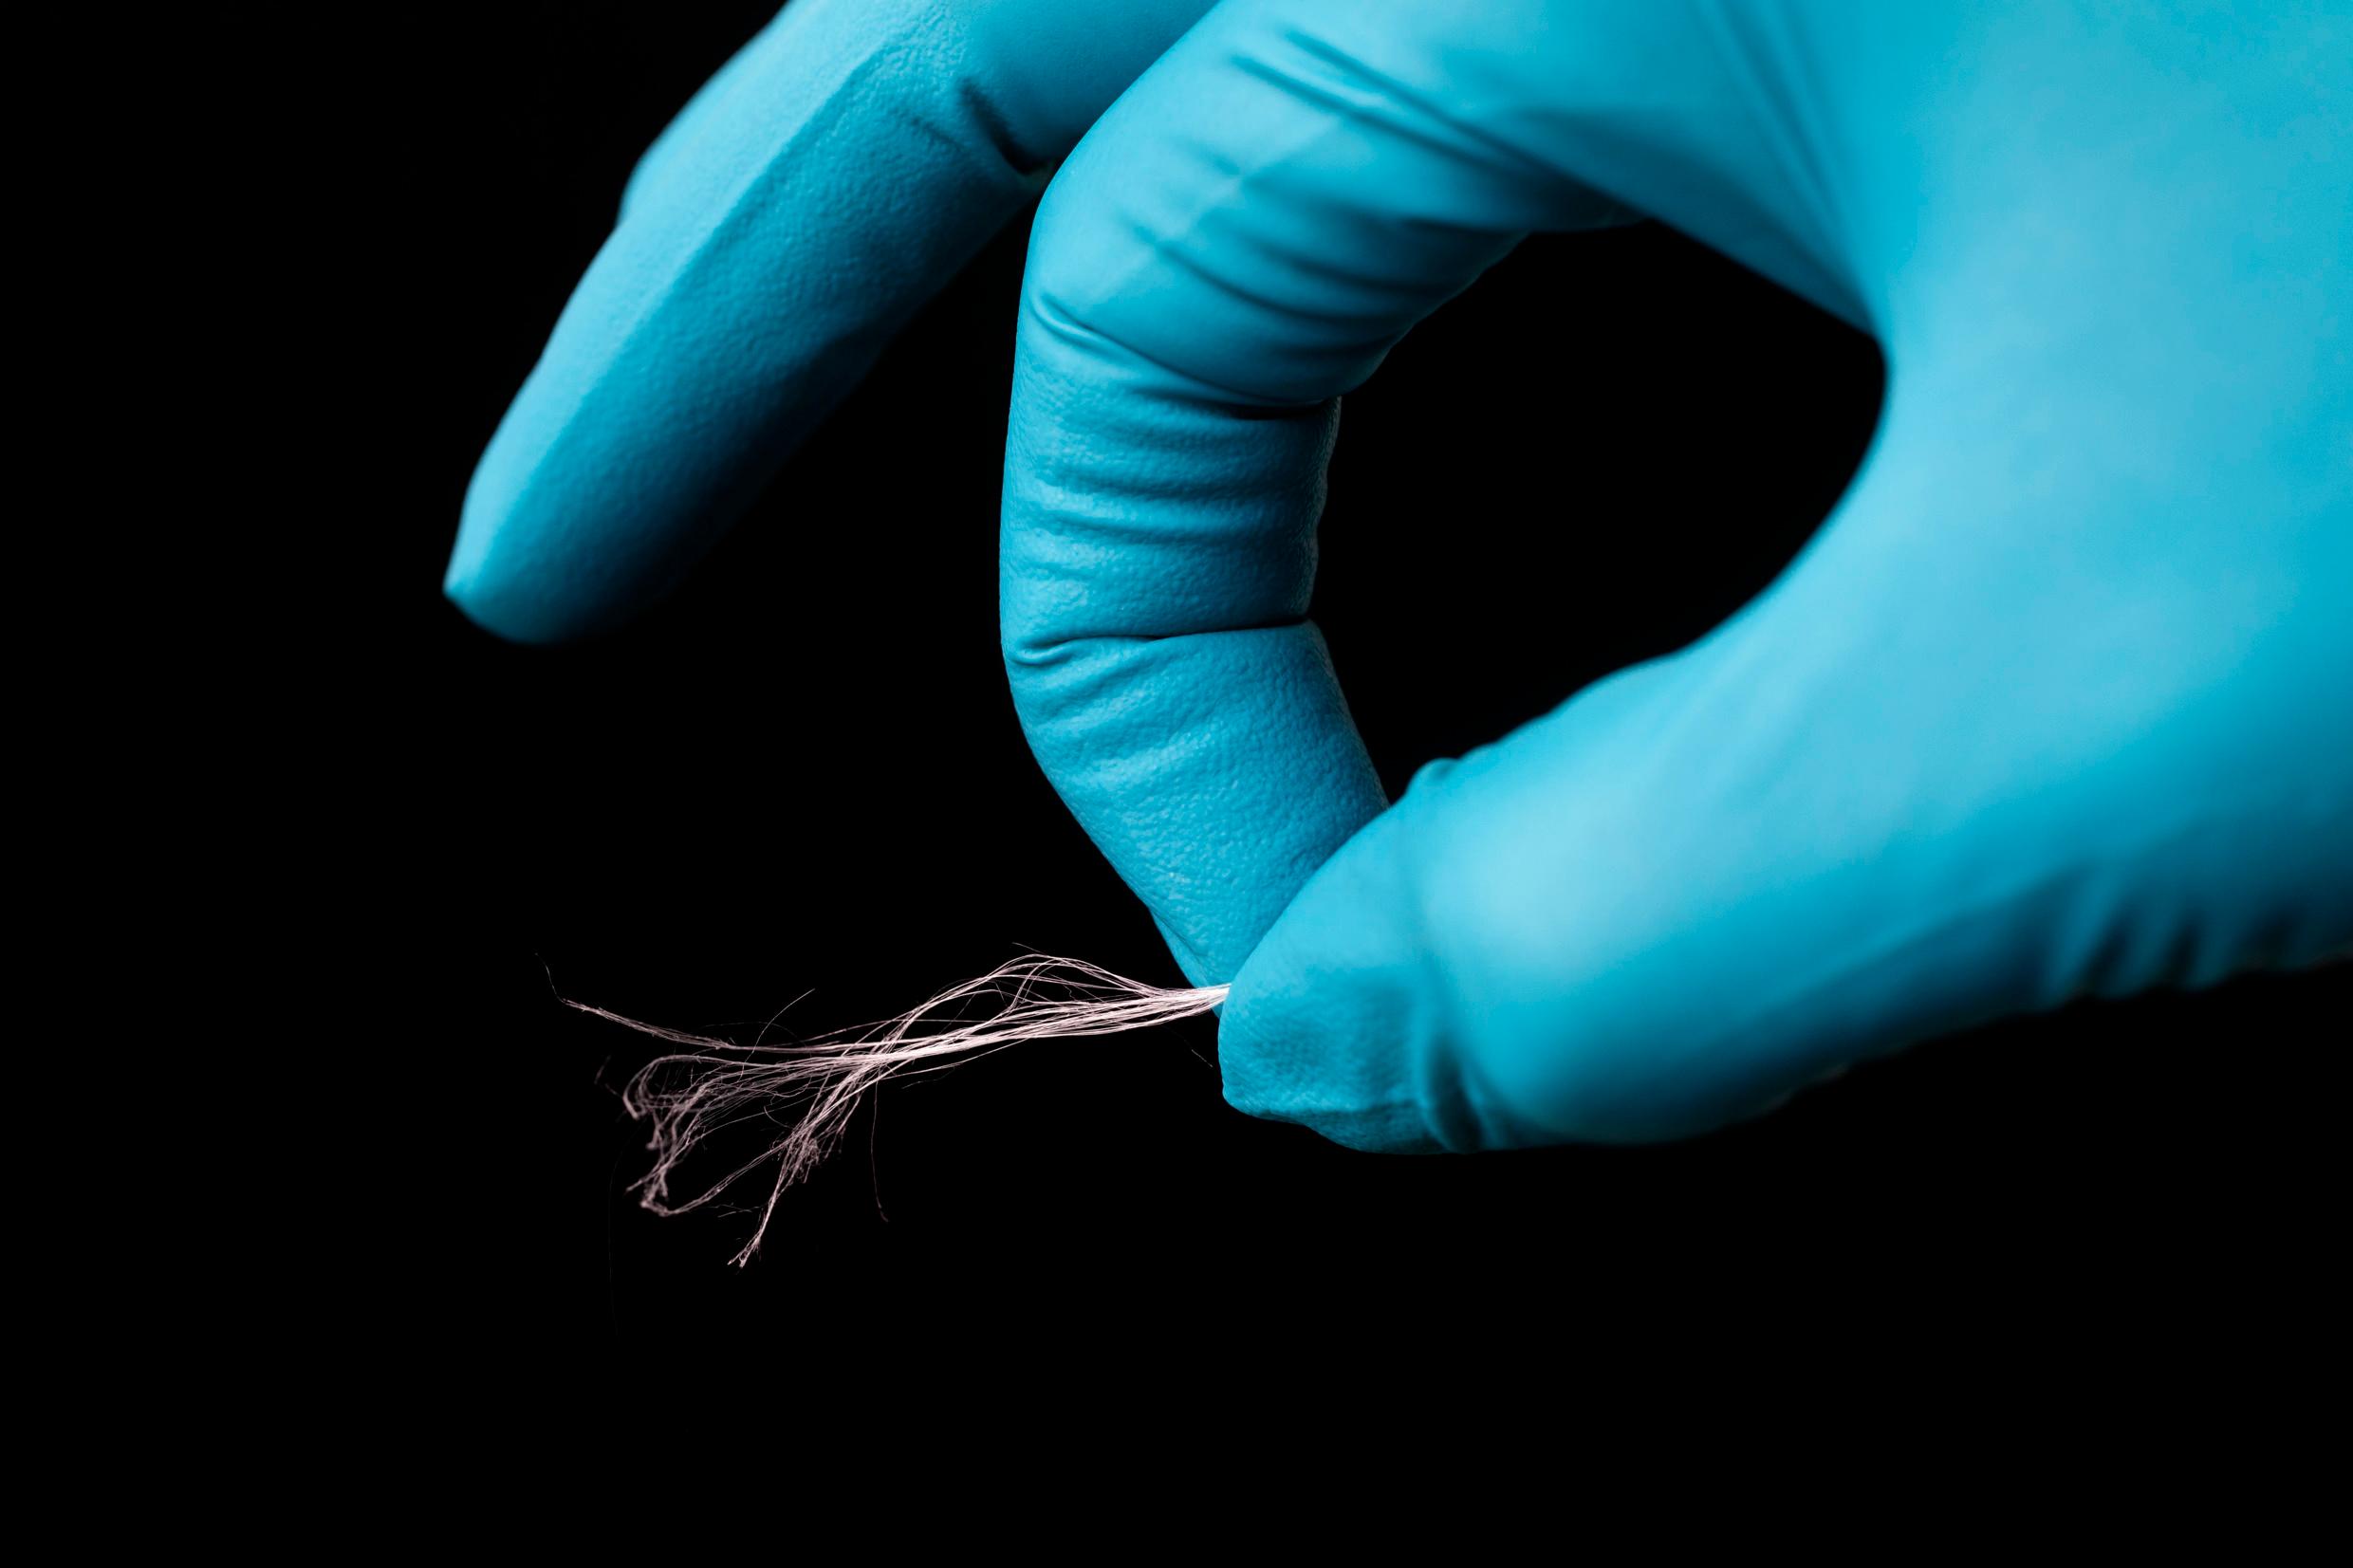 A hand covered with a latex glove holds up a very thin thread.